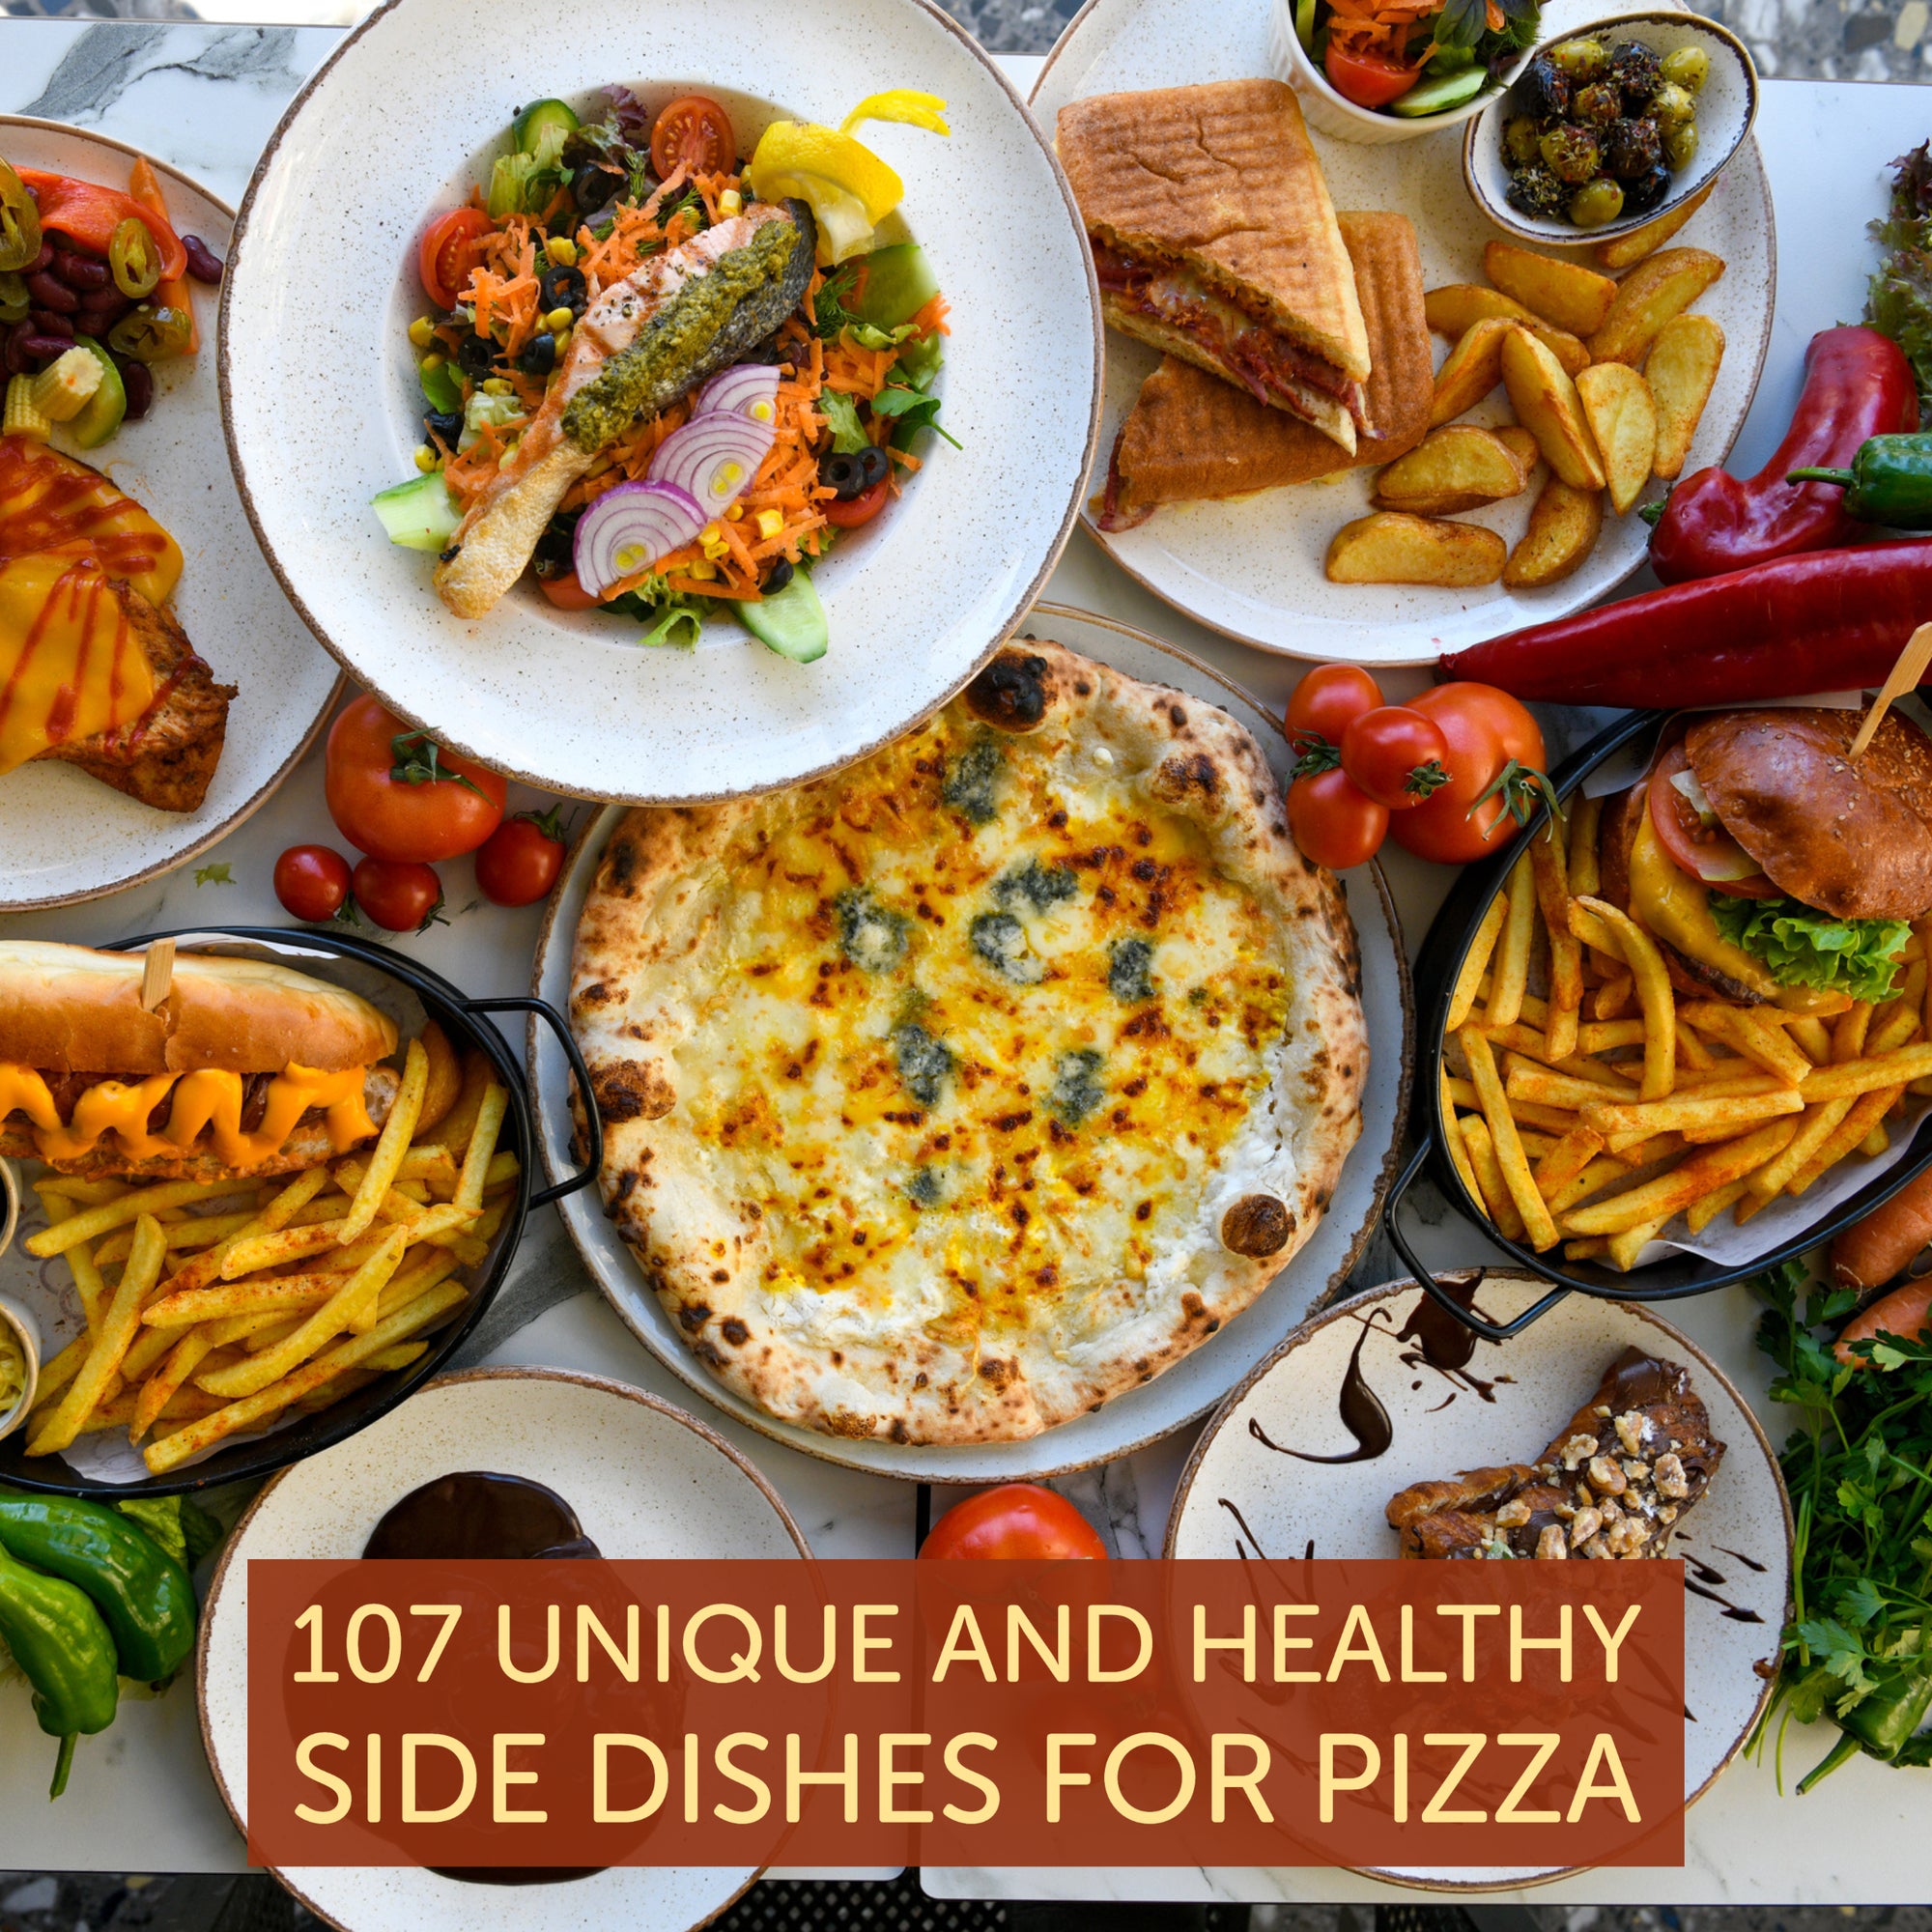 107 Unique and Healthy Side Dishes For Pizza